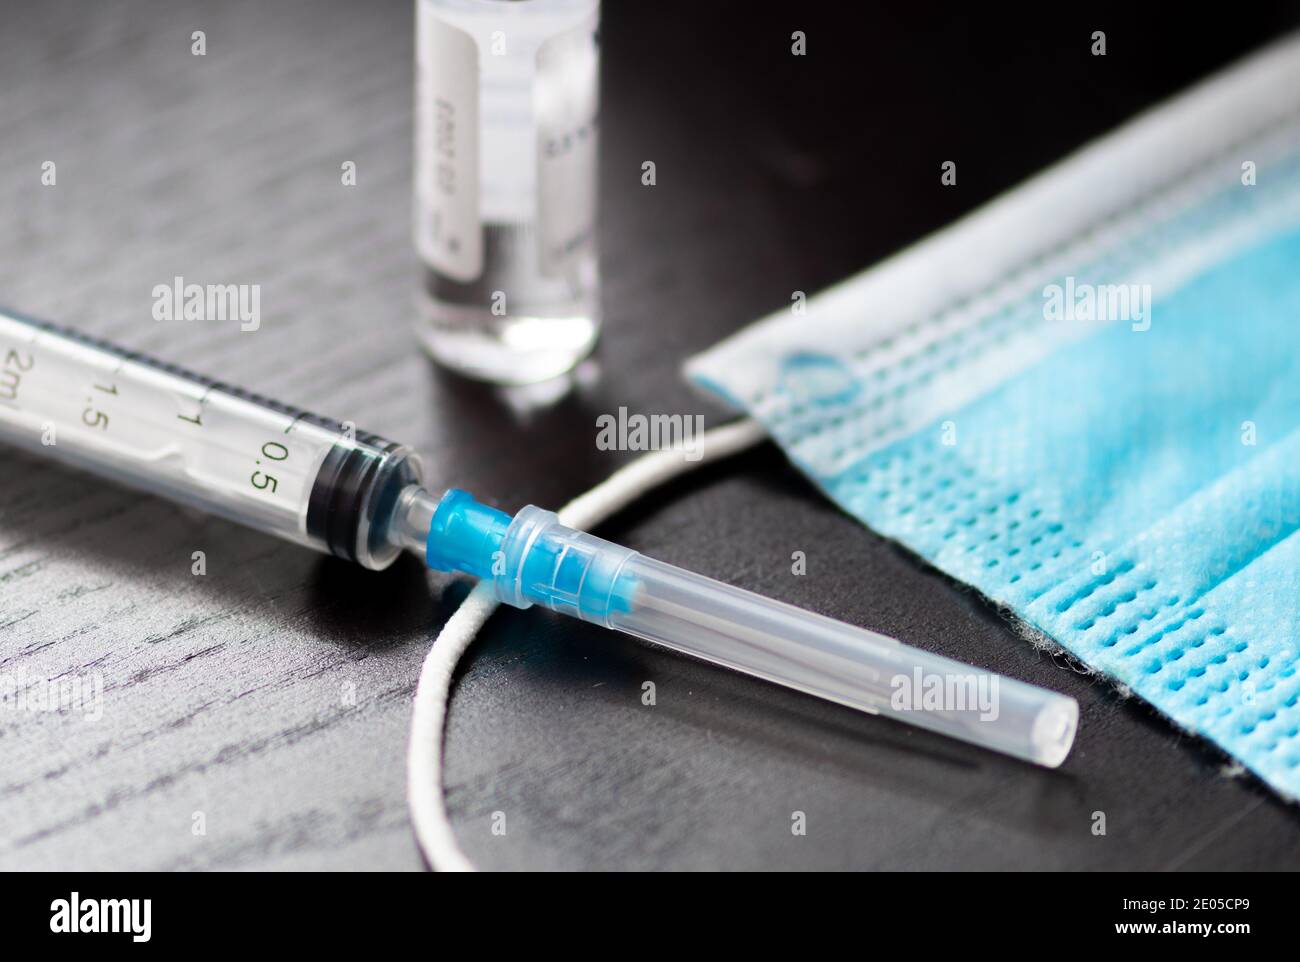 Syringe, vial and surgical face mask on a table ready to be used. Covid or Coronavirus vaccine background Stock Photo